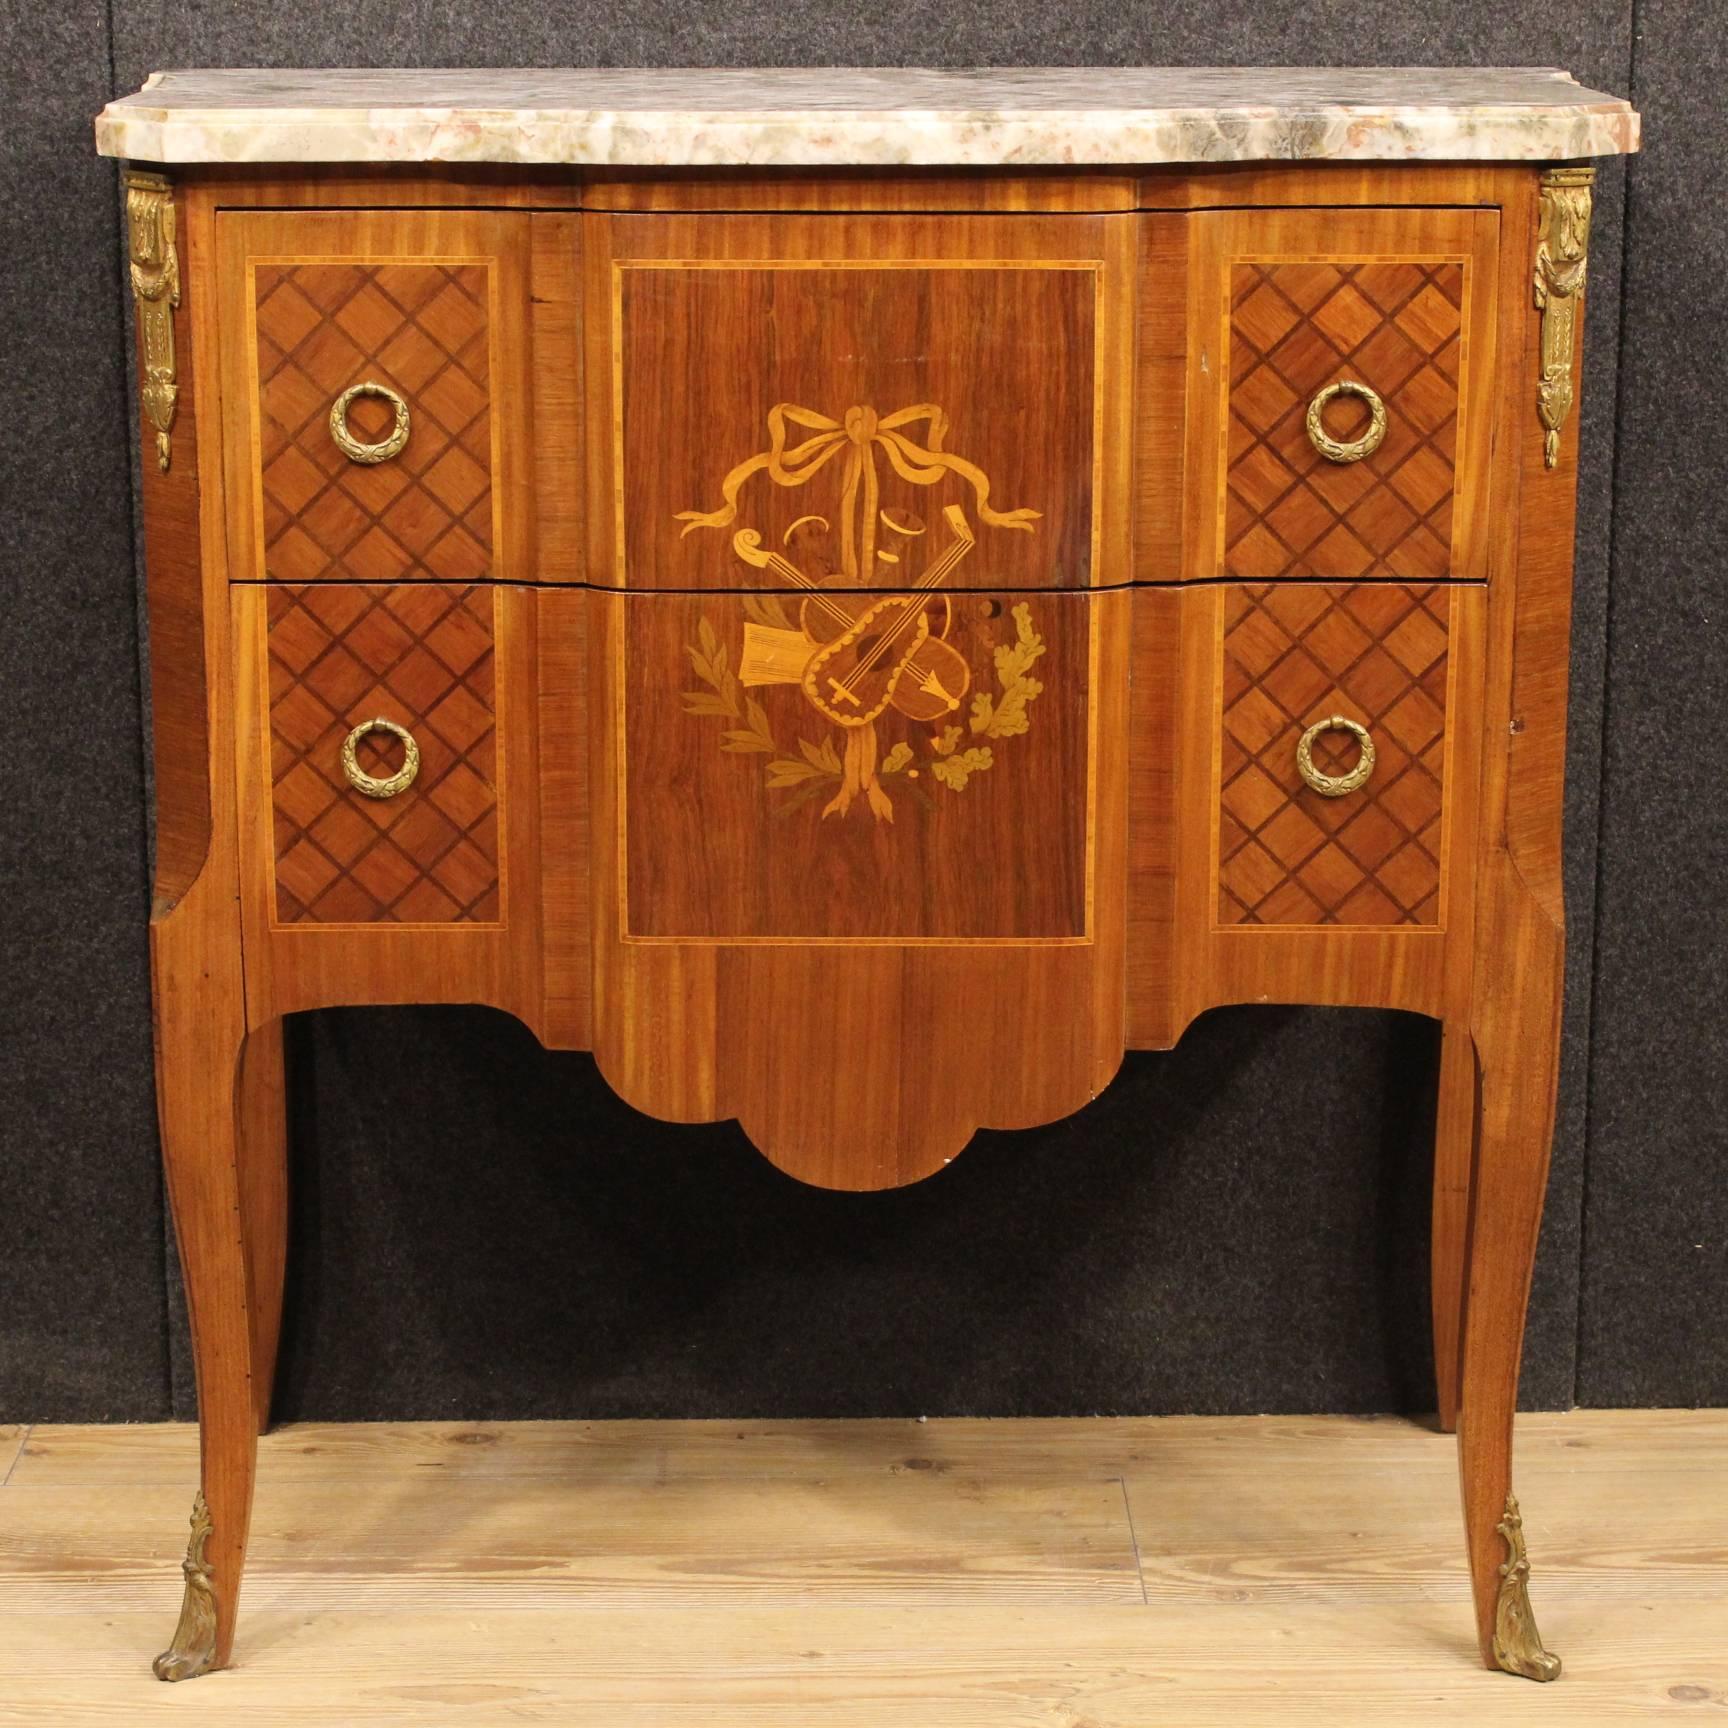 Small French dresser of the 20th century. Furniture nicely inlaid in mahogany, rosewood, palisander, maple, boxwood and fruitwood and decorated with gilded and chiseled bronze. Very elegant dresser adorned with geometric inlay on the sides and